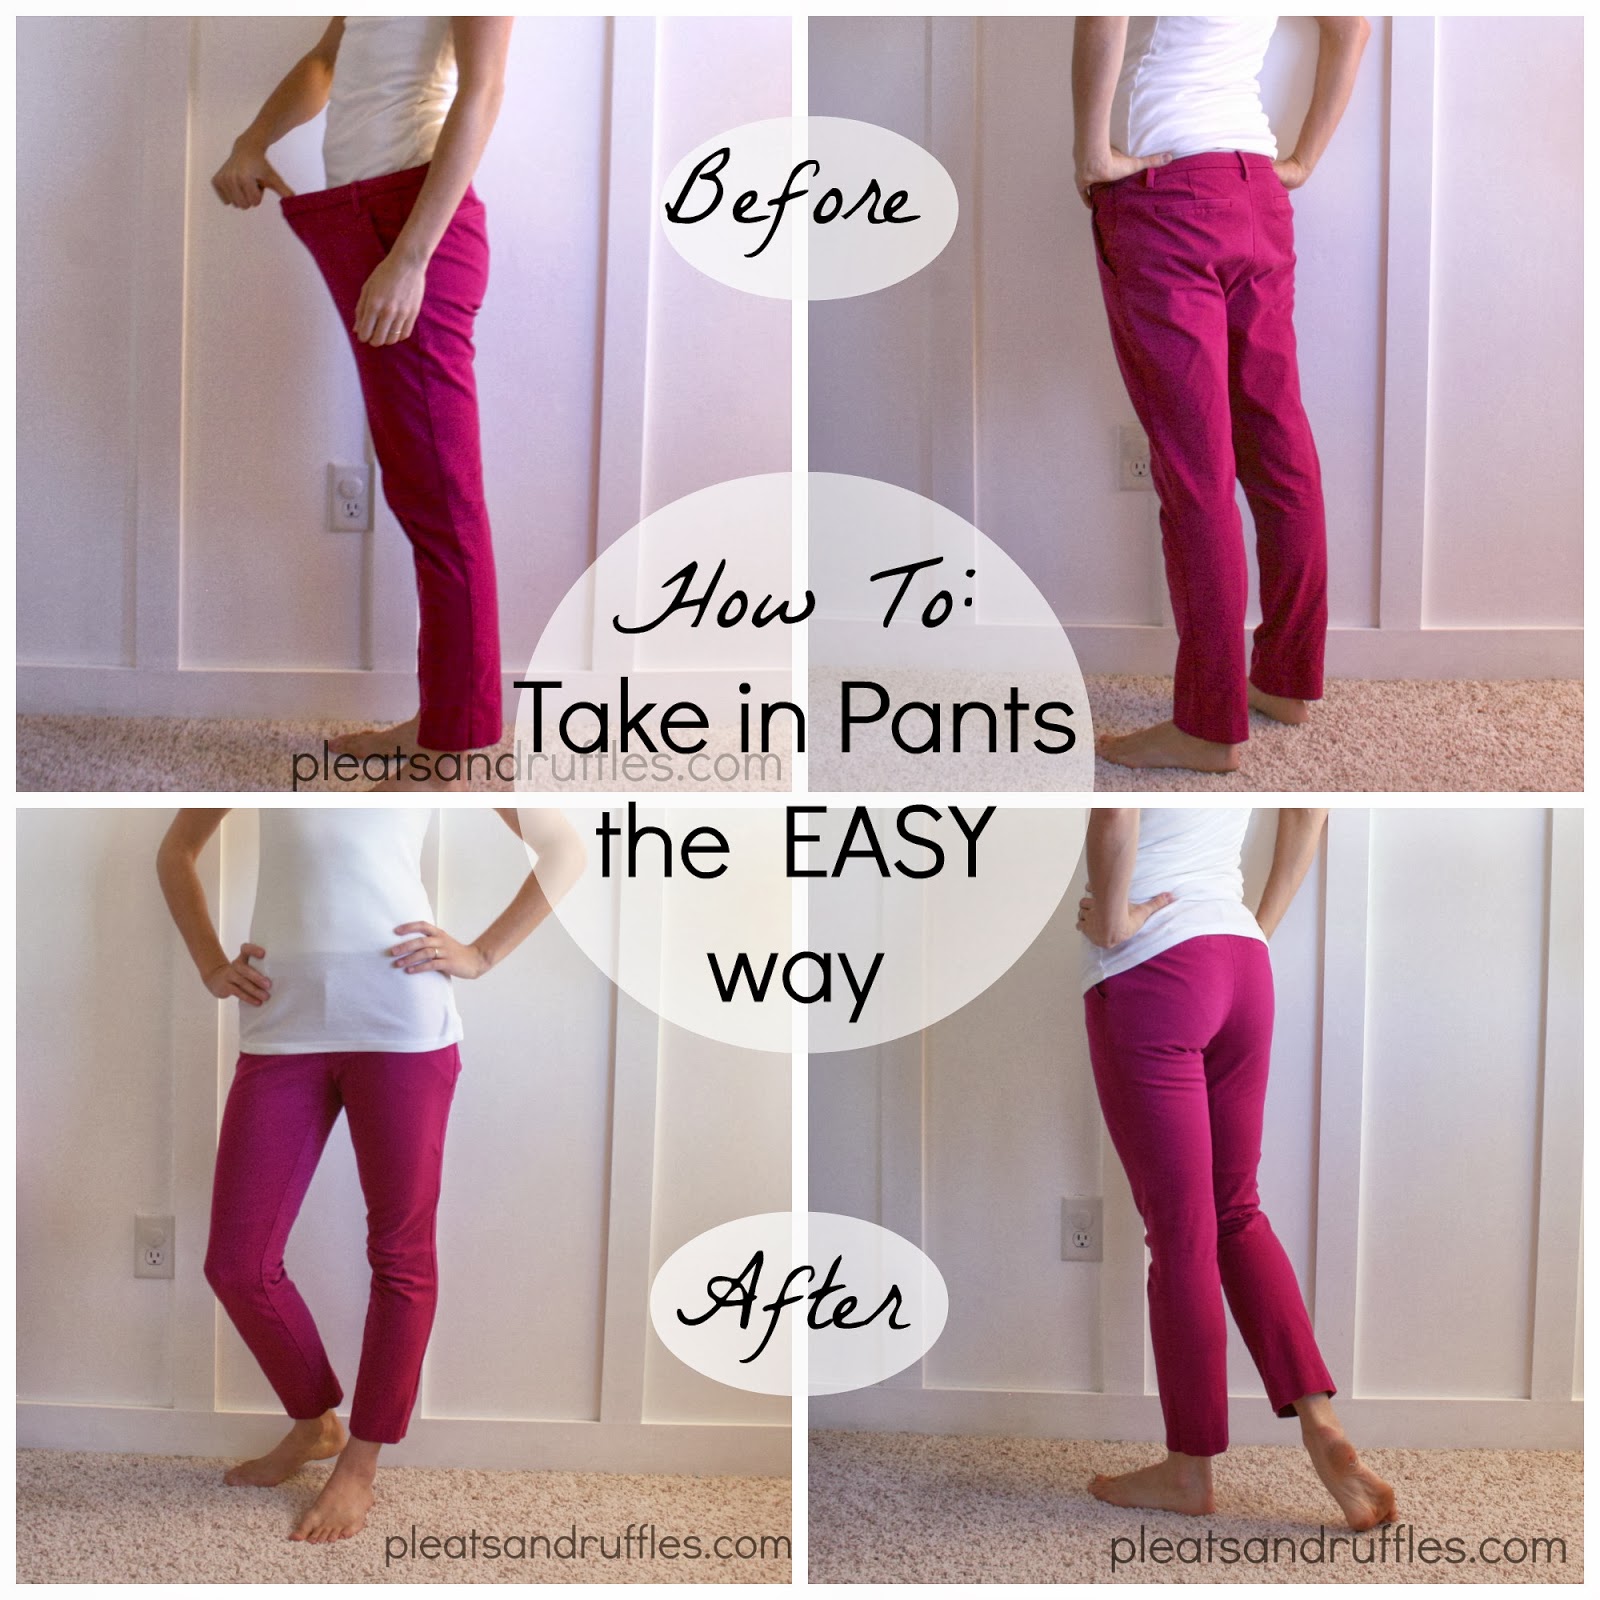 How To: Take in pants the EASY way | Diy clothes alterations, Diy ...